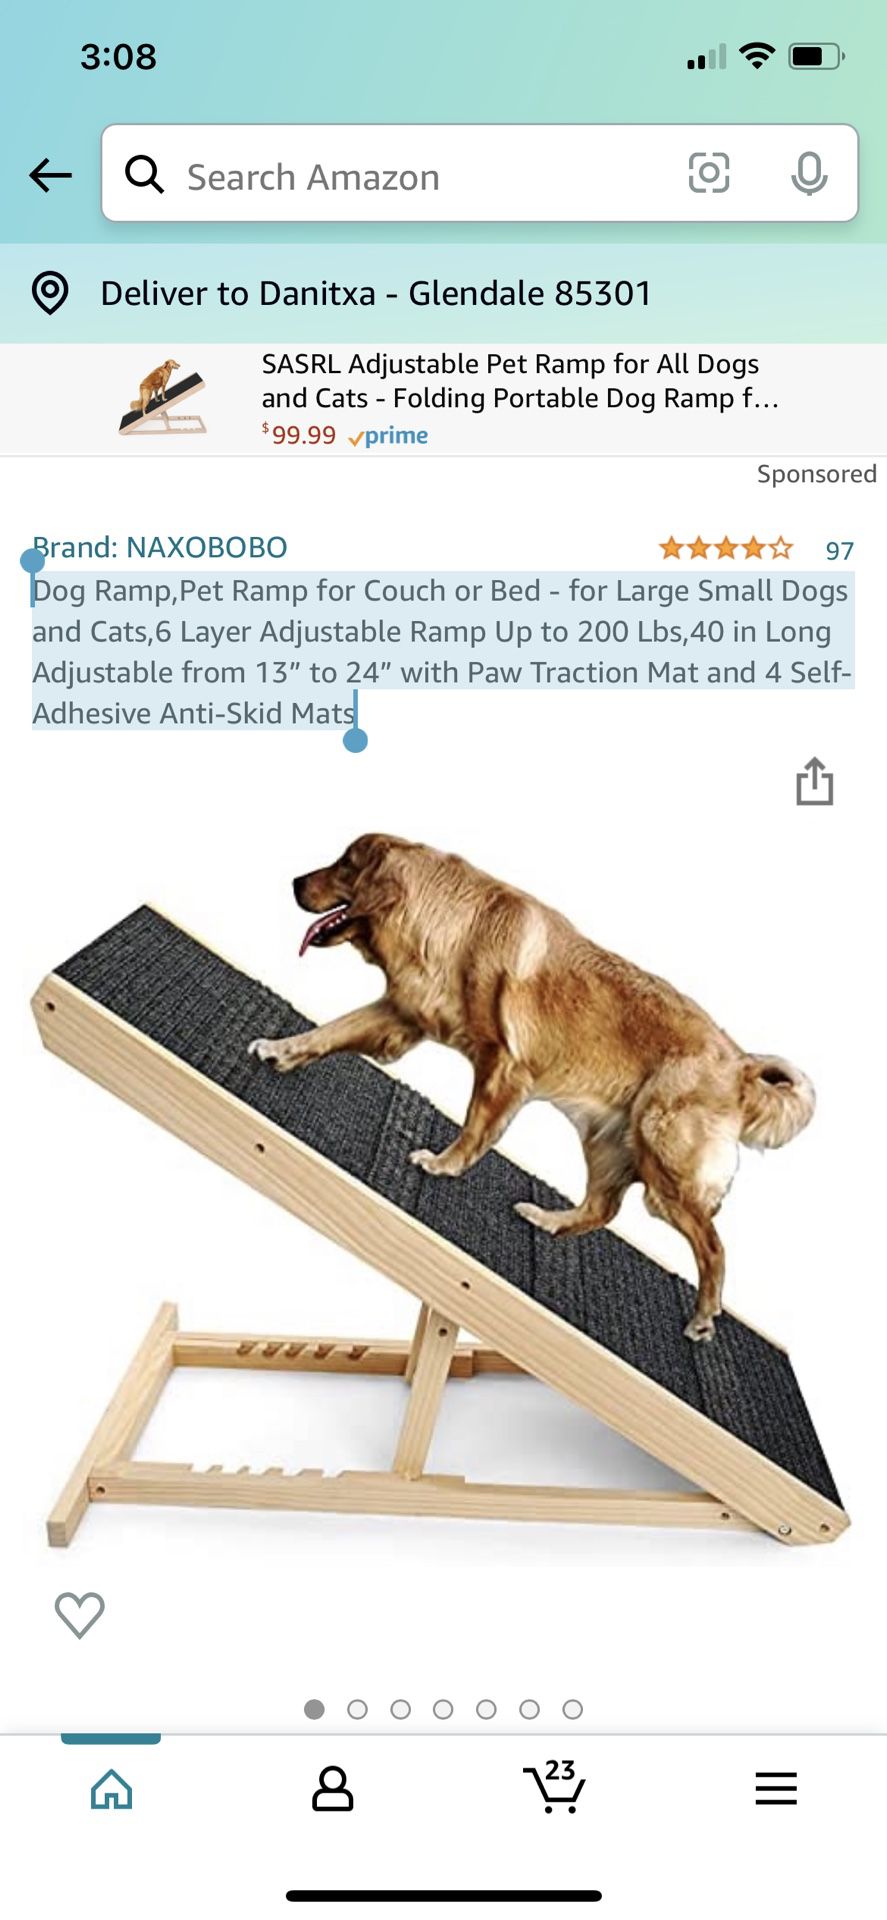 Dog Ramp,Pet Ramp for Couch or Bed - for Large Small Dogs and Cats,6 Layer Adjustable Ramp Up to 200 Lbs,40 in Long Adjustable from 13” to 24” with Pa